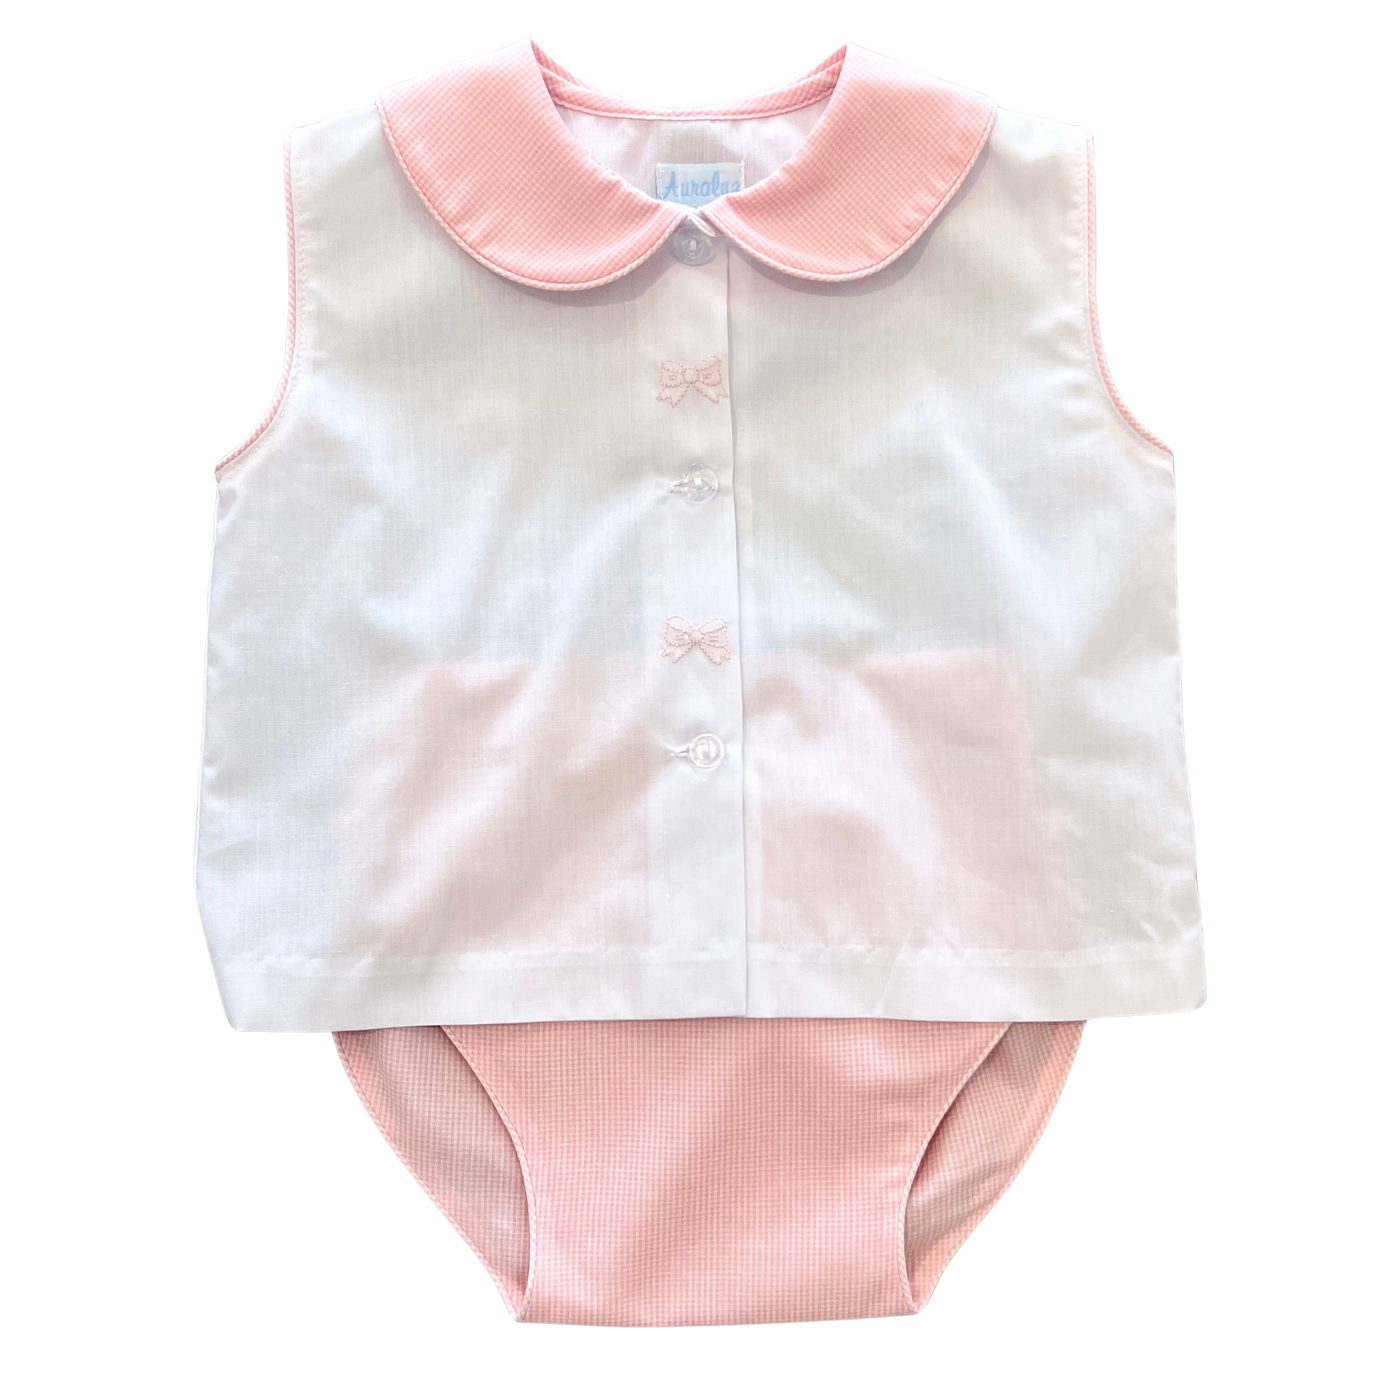 Bow Embroidered Diaper Set - Pink/White Minicheck